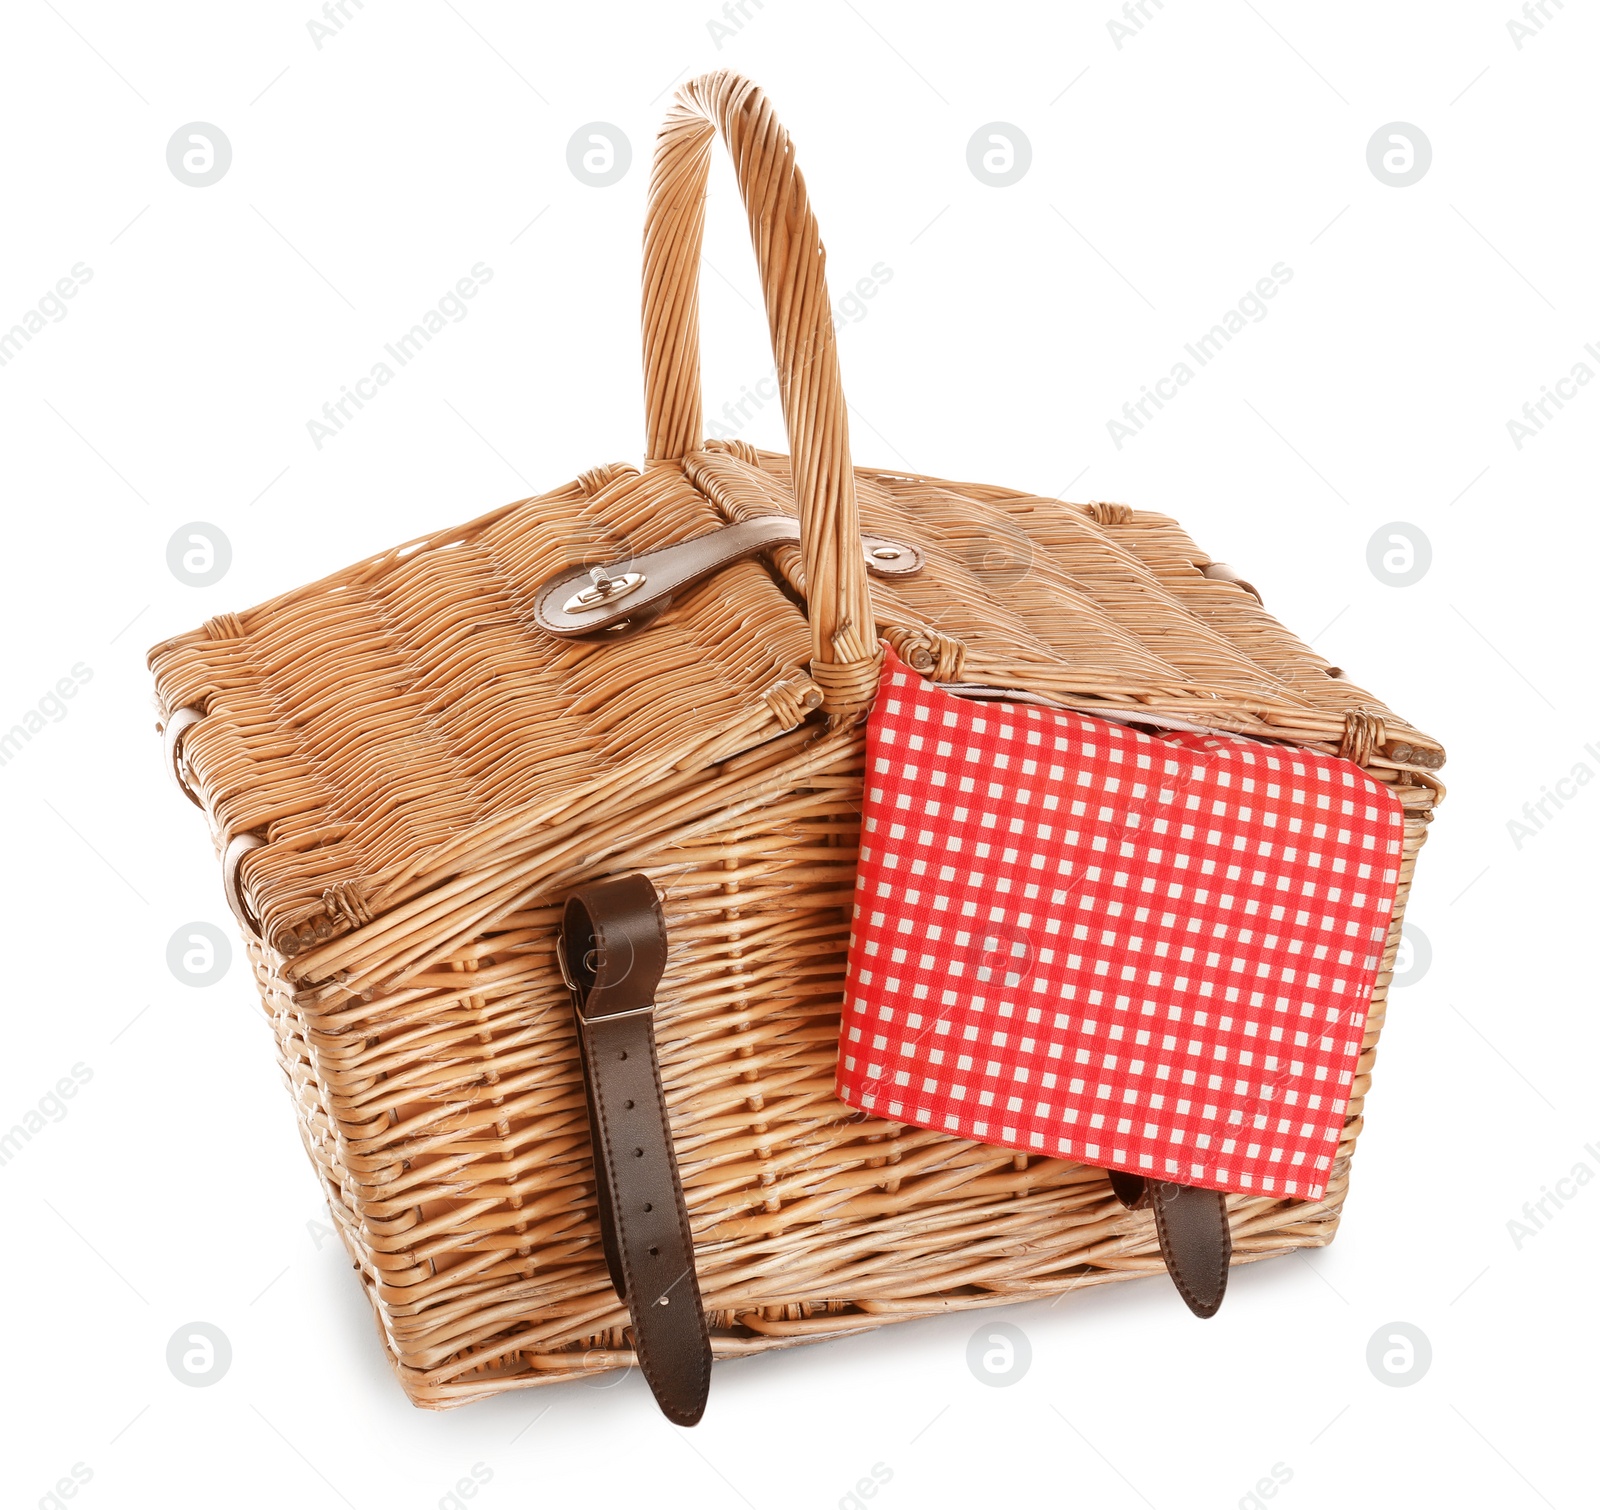 Photo of Closed wicker picnic basket with checkered tablecloth on white background